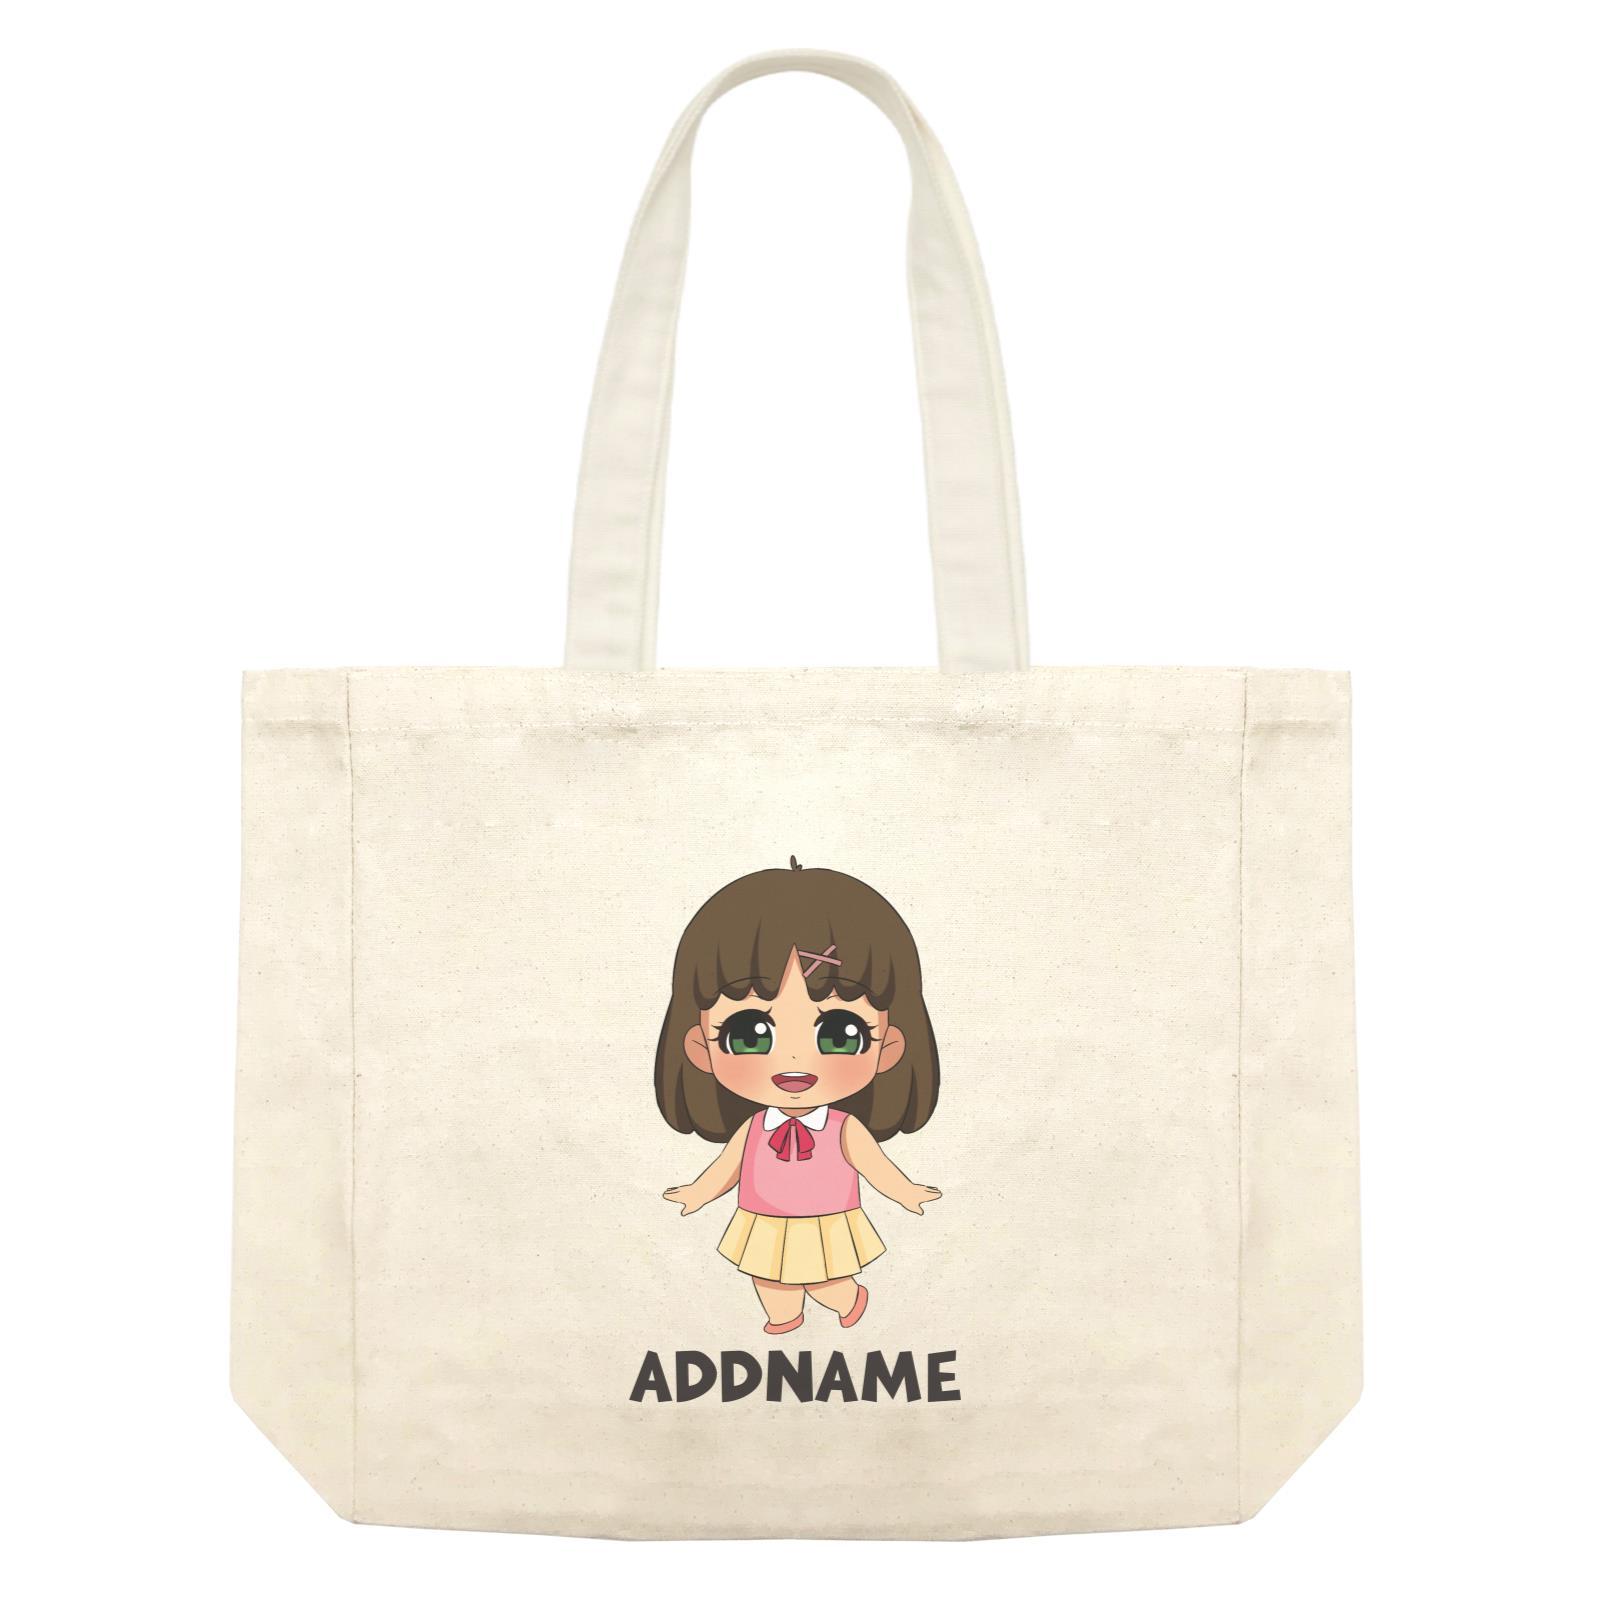 Children's Day Gift Series Little Chinese Girl Addname Shopping Bag